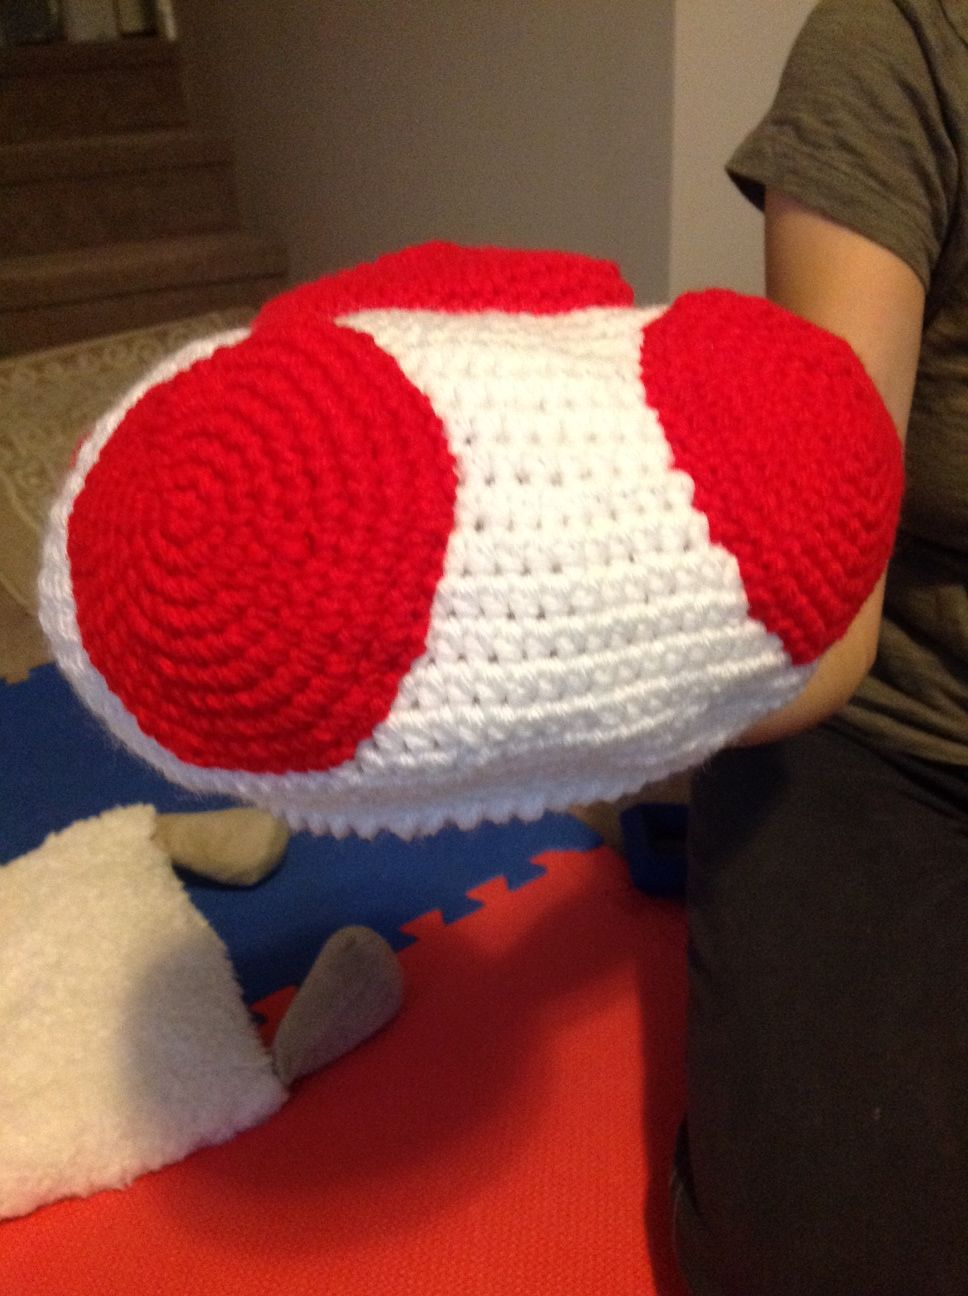 Mario Hat Crochet Pattern Super Mario Brothers Toad Crochet Hat Pretty Cool Eh Admit It